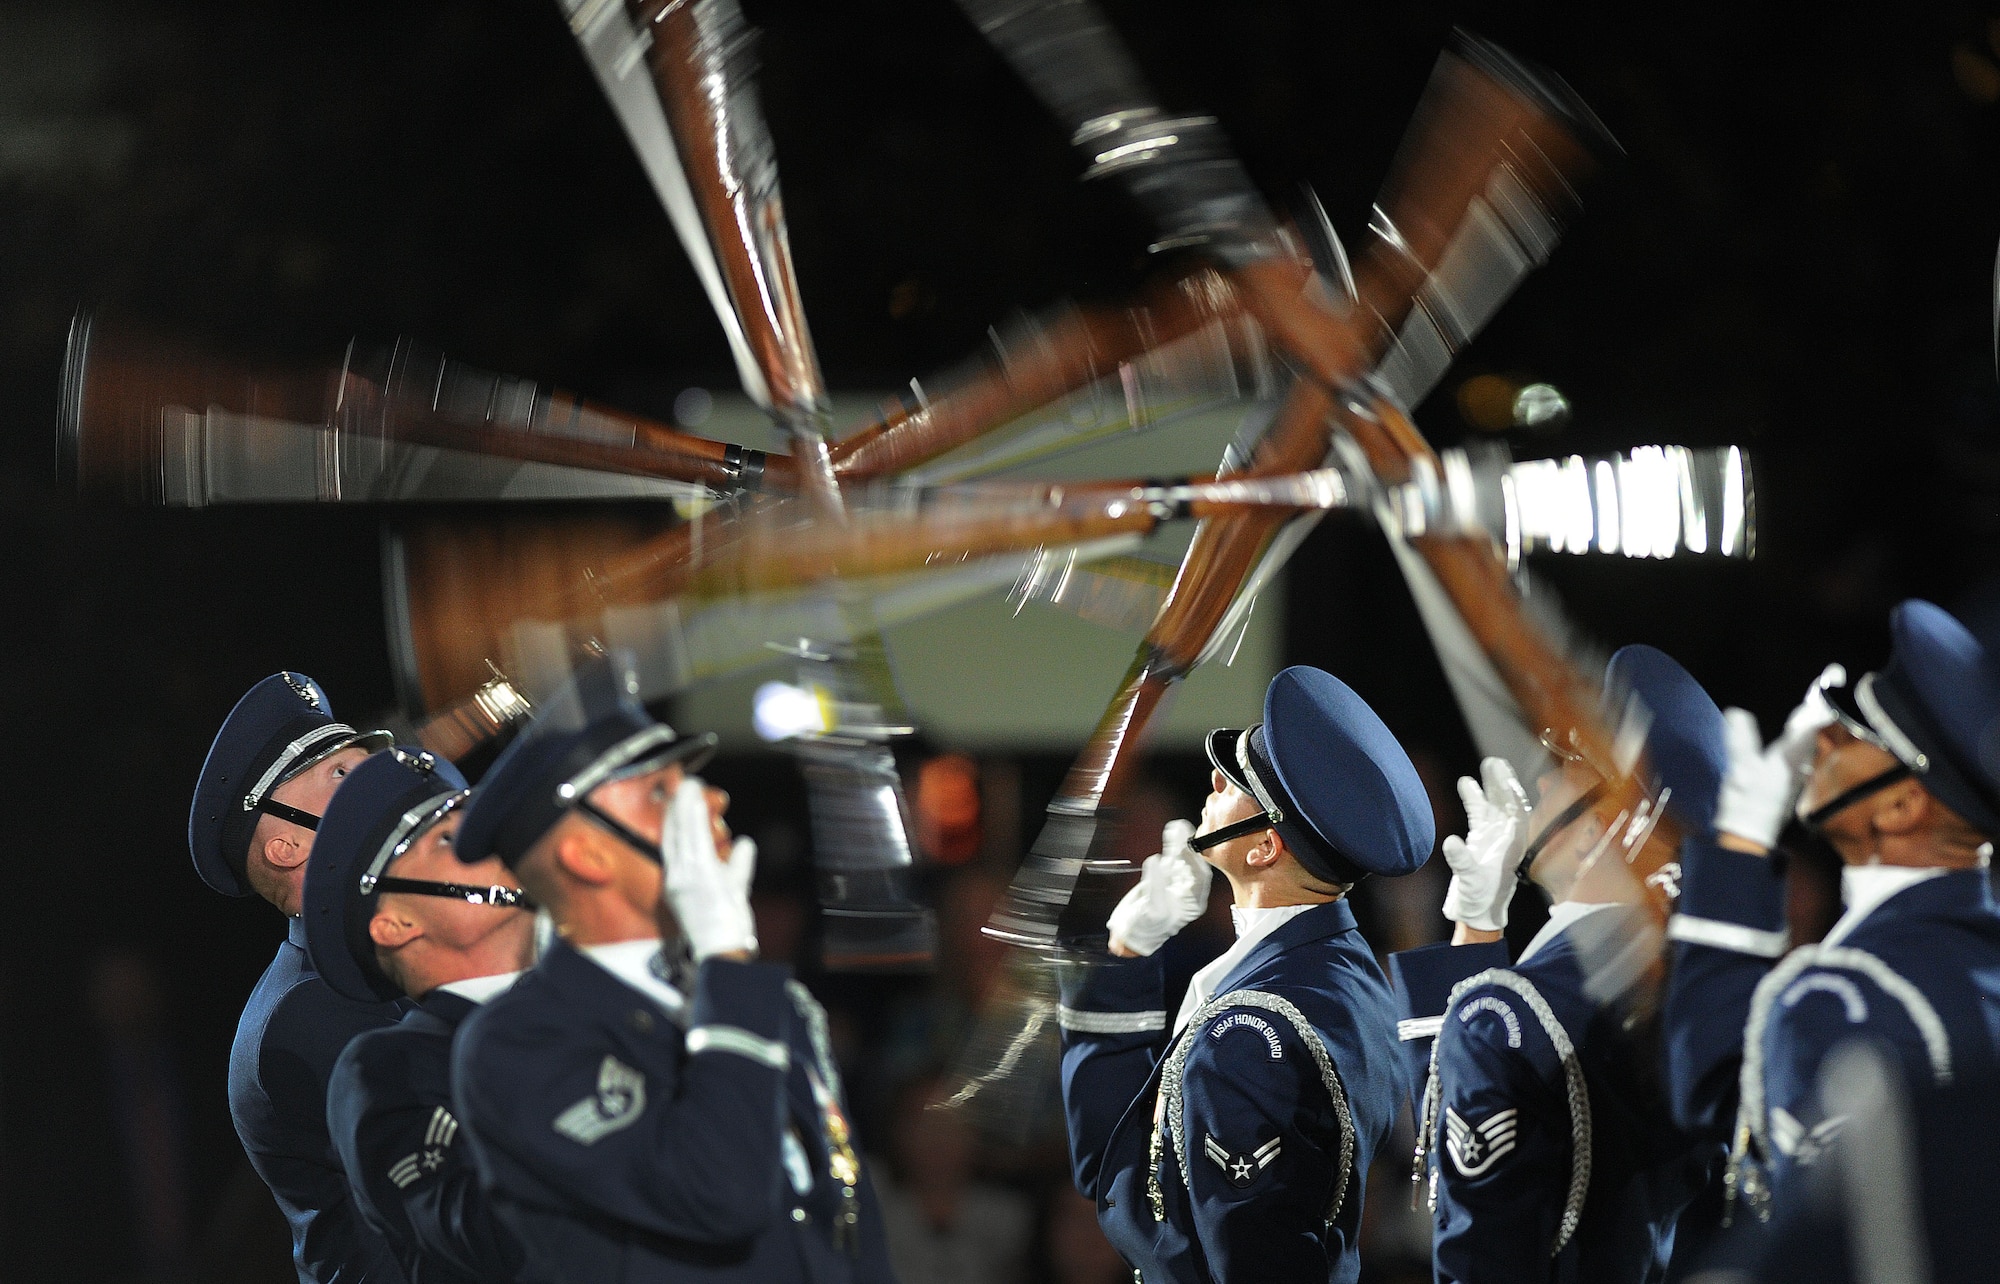 The United States Air Force Honor Guard Drill Team performs during the United States Air Force Tattoo on Sept. 17, 2015. The Air Force District of Washington commemorated the United States Air Force's 68th birthday September 17, 2015 with a celebration of music, drill and ceremony, aircraft, and fireworks on the Air Force Ceremonial Lawn at Joint Base Anacostia-Bolling. The event included flyovers of several aircraft that included the Air Force Thunderbirds and a Warbird vintage aircraft squadron, as well as performances by the Air Force Band and Honor Guard. (U.S. Air Force photo/Jim Lotz)